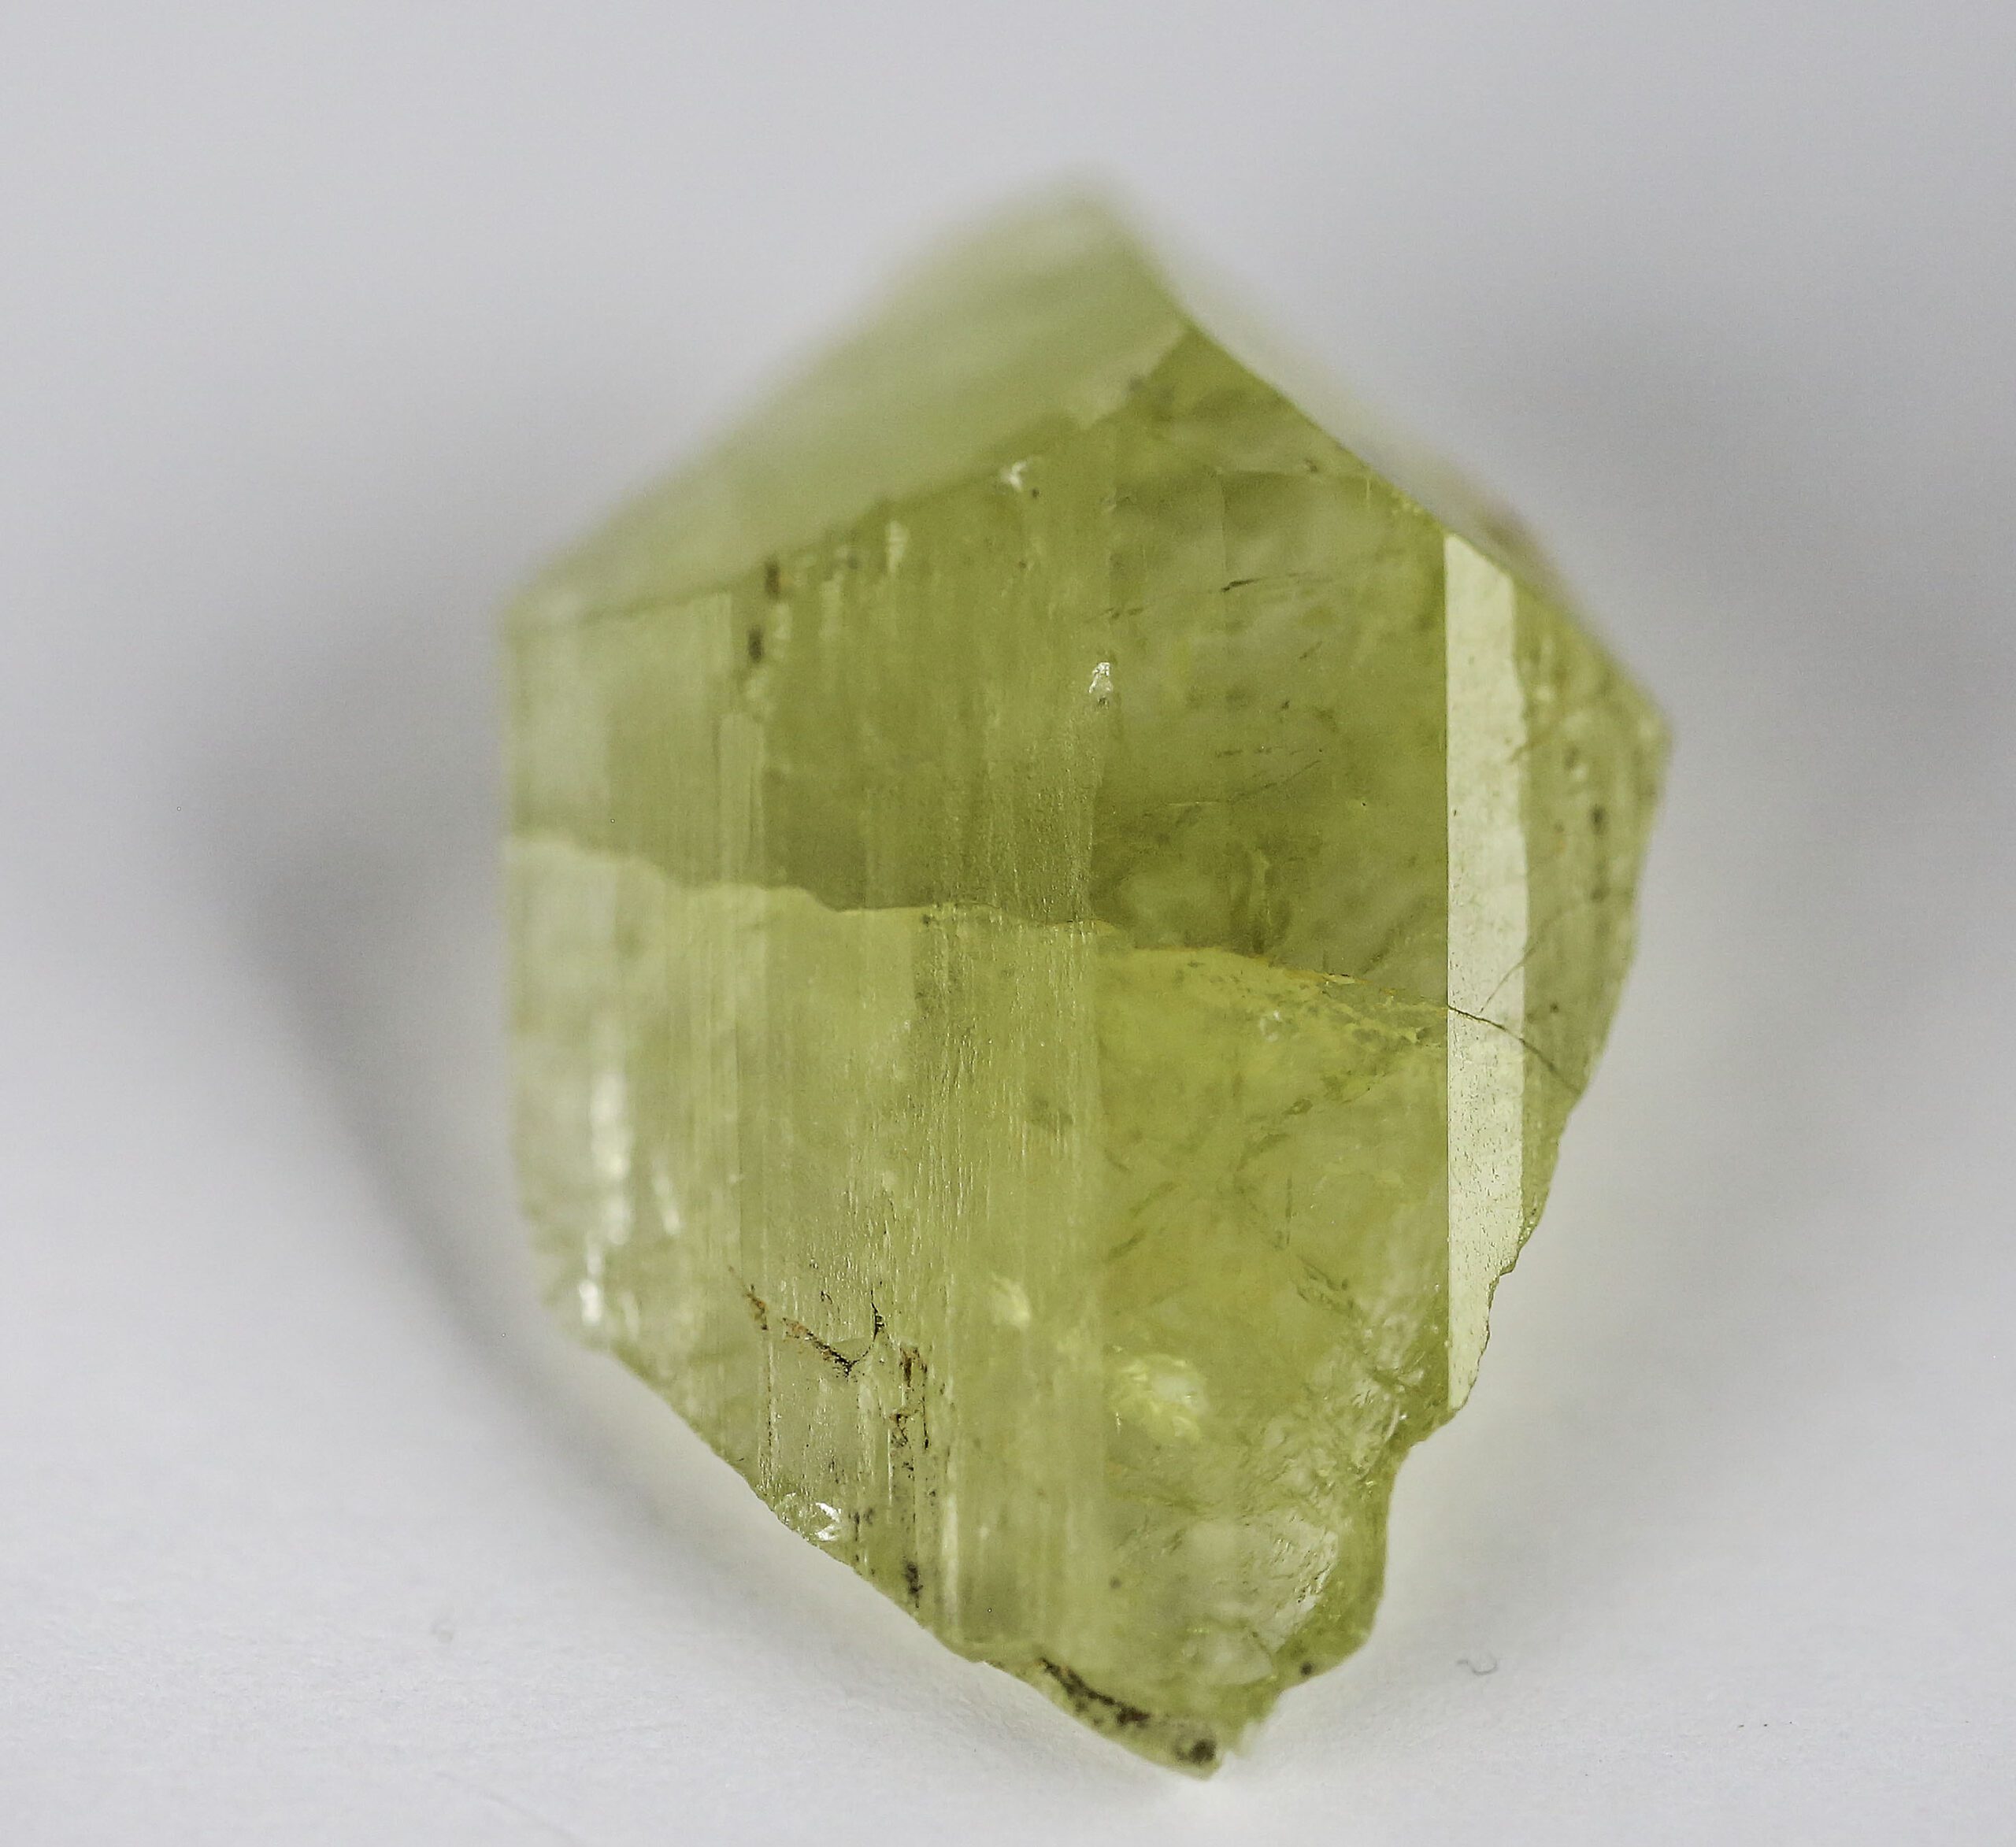 Gemstone Discoveries: What Is the Likeliness of Finding a ‘New’ Gemstone? - - Rough brazilianite photographed scaled